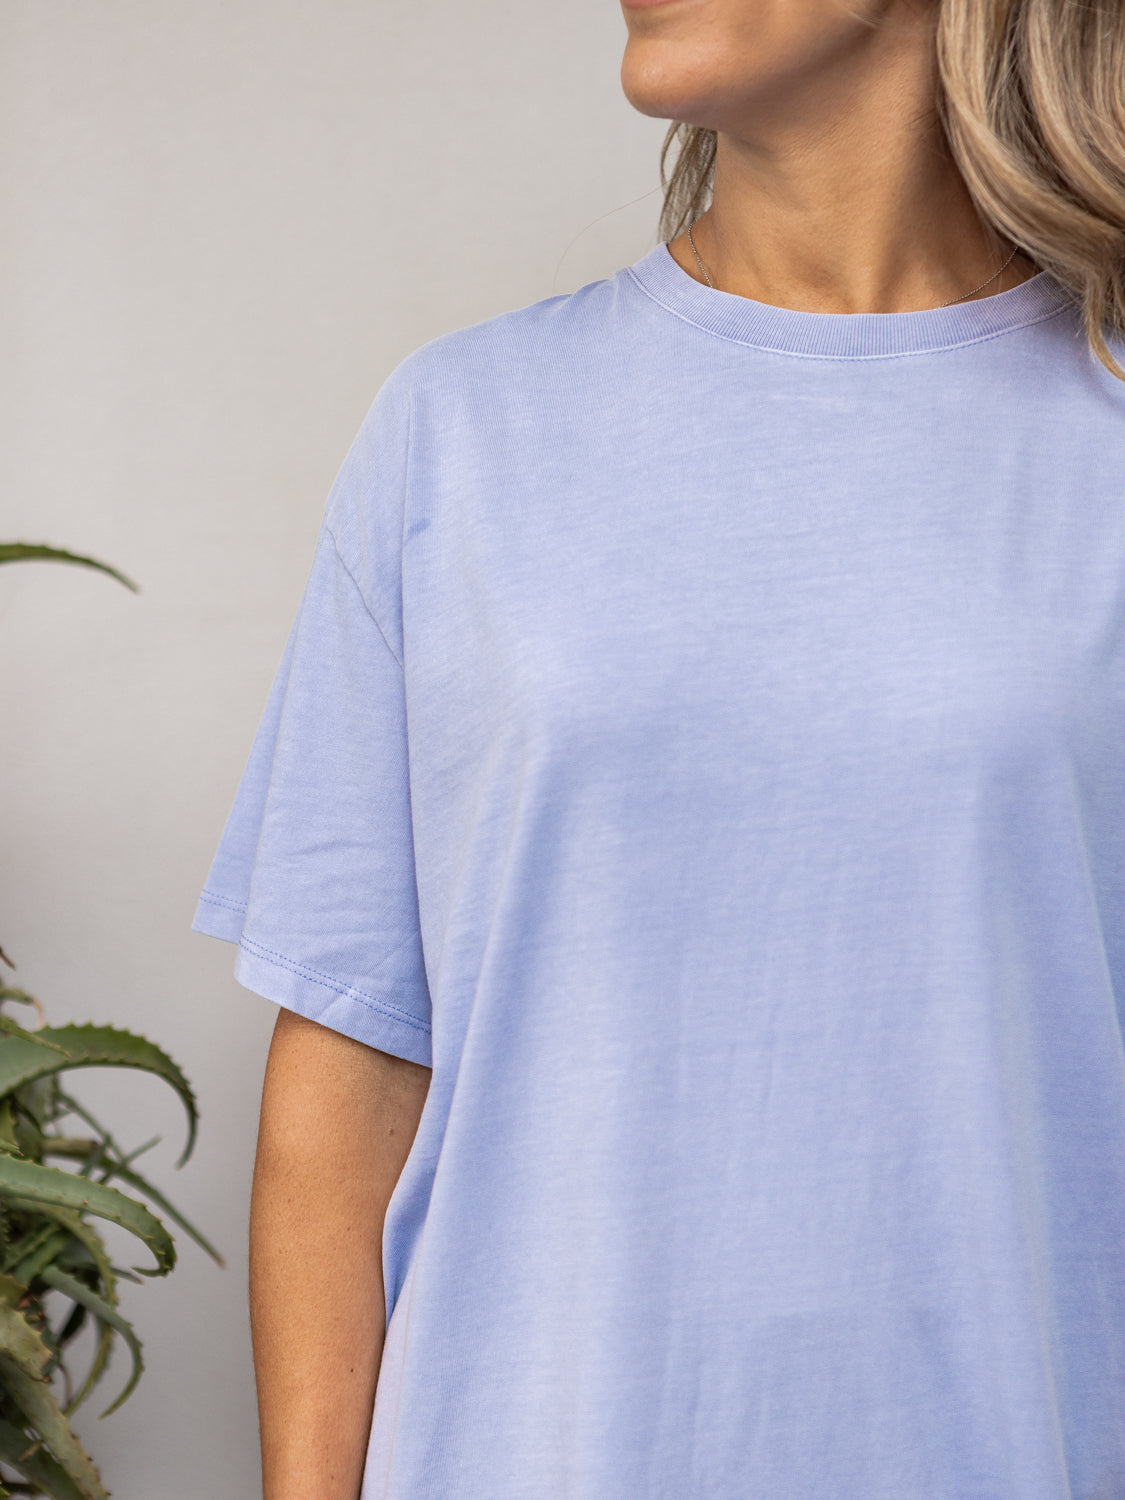 Silent Theory Oversized Tee - Blue